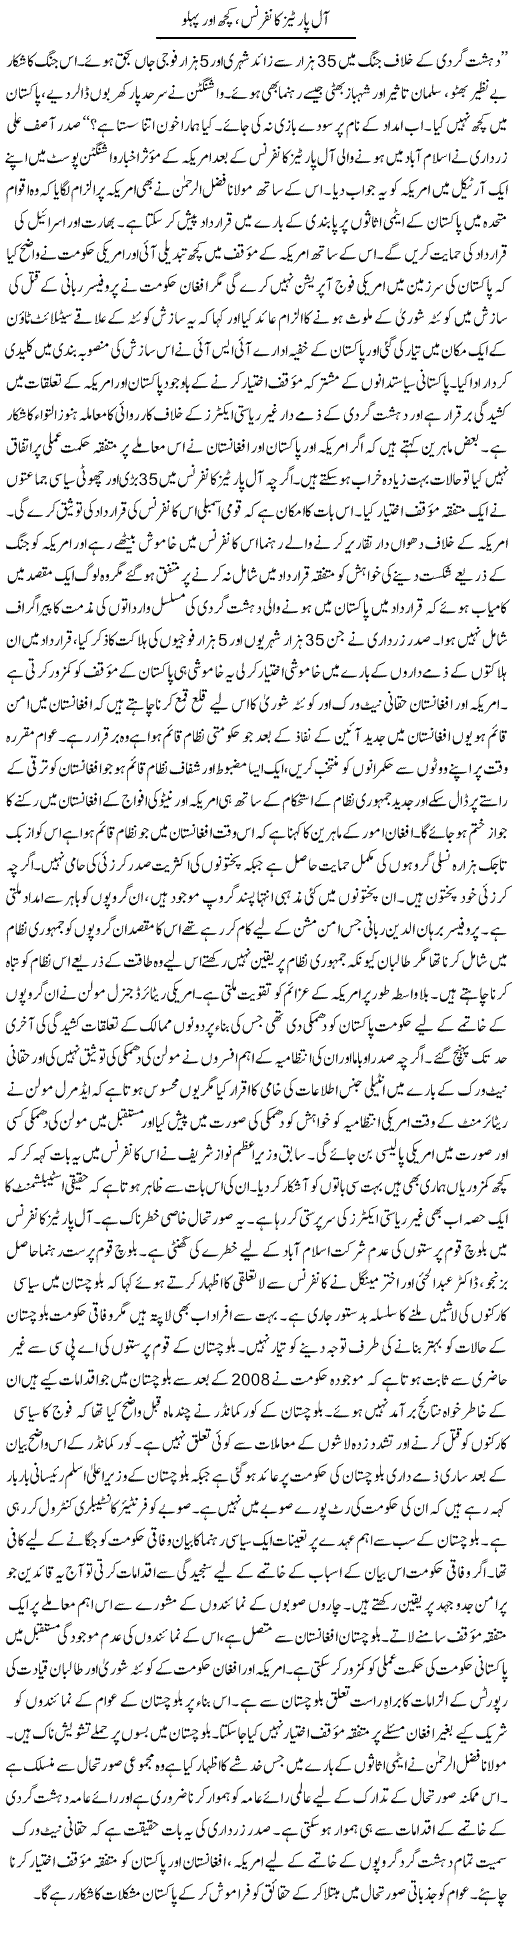 All Parties Conference Express Column Tauseef Ahmed 5 October 2011